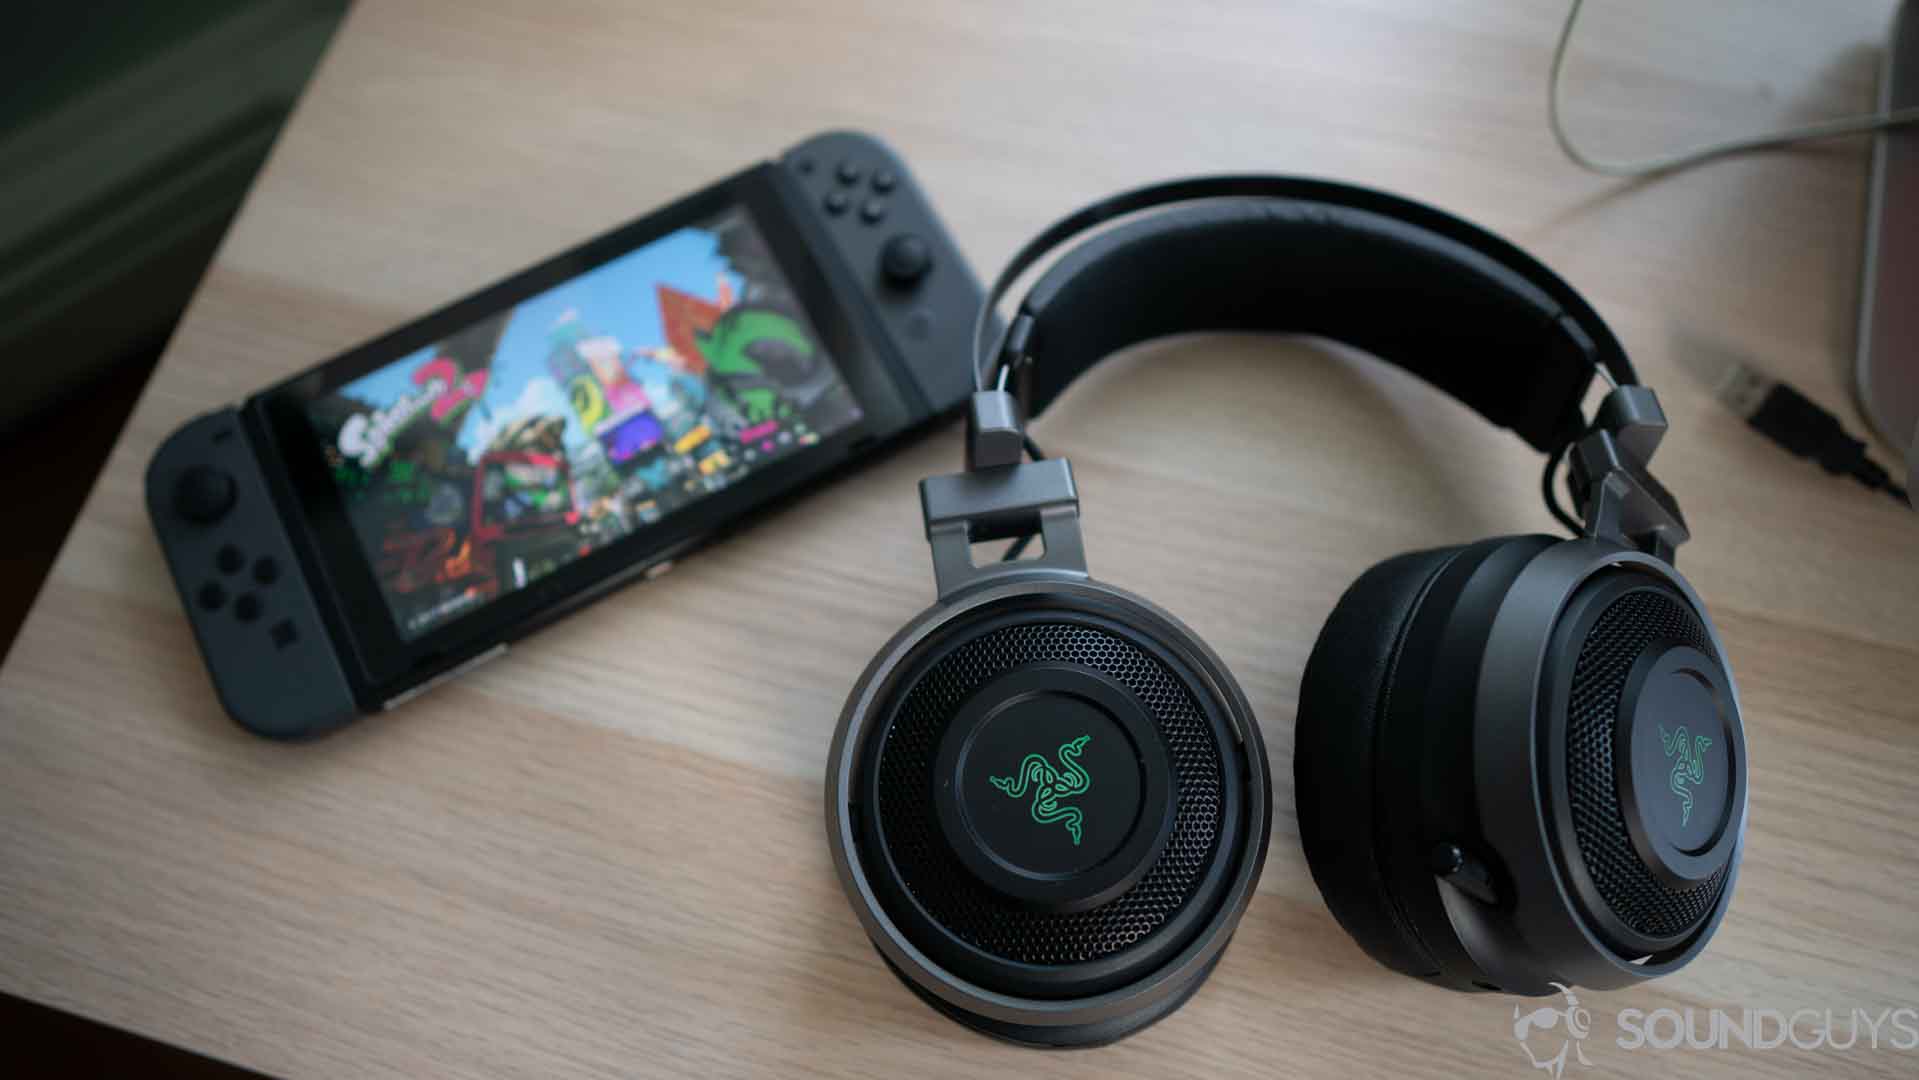 A picture of the Razer Nari Ultimate gaming headset next to a nintendo switch.